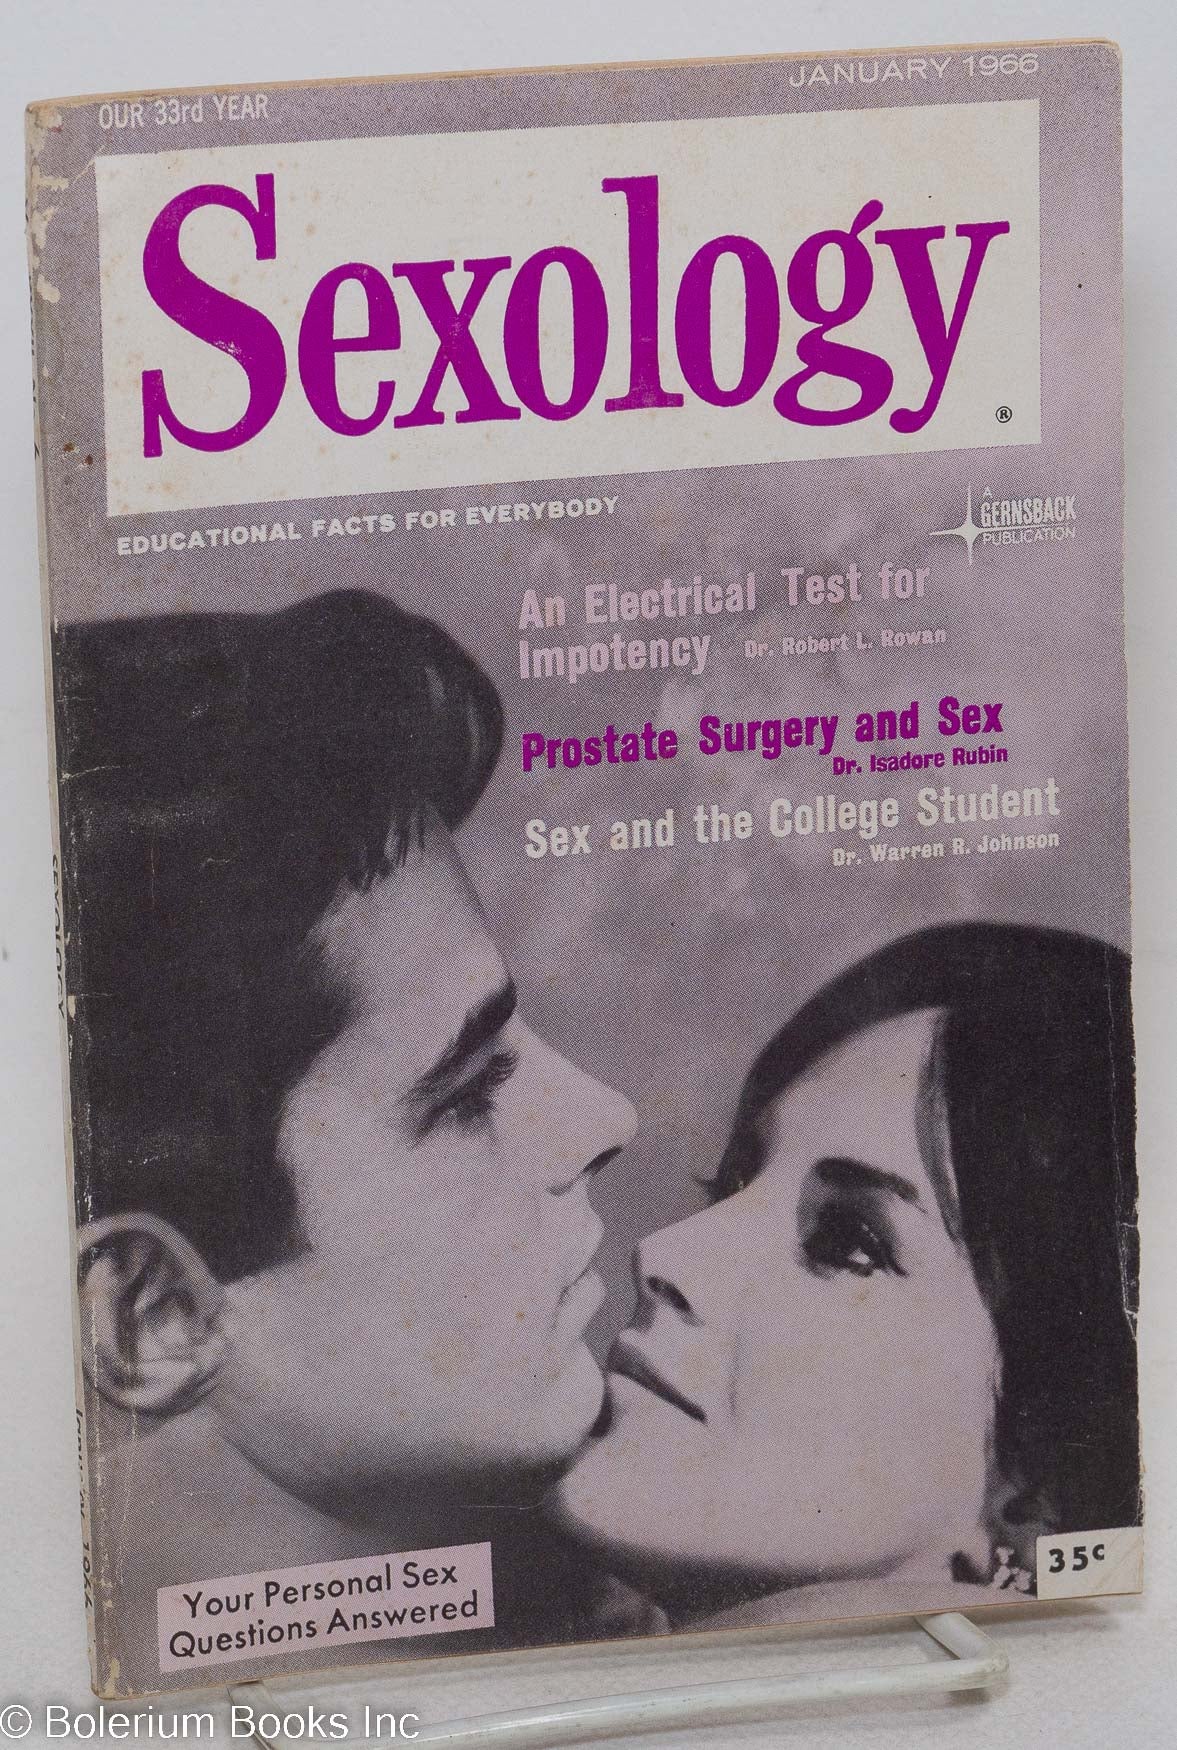 Sexology educational facts for everybody; vol. 32, #6